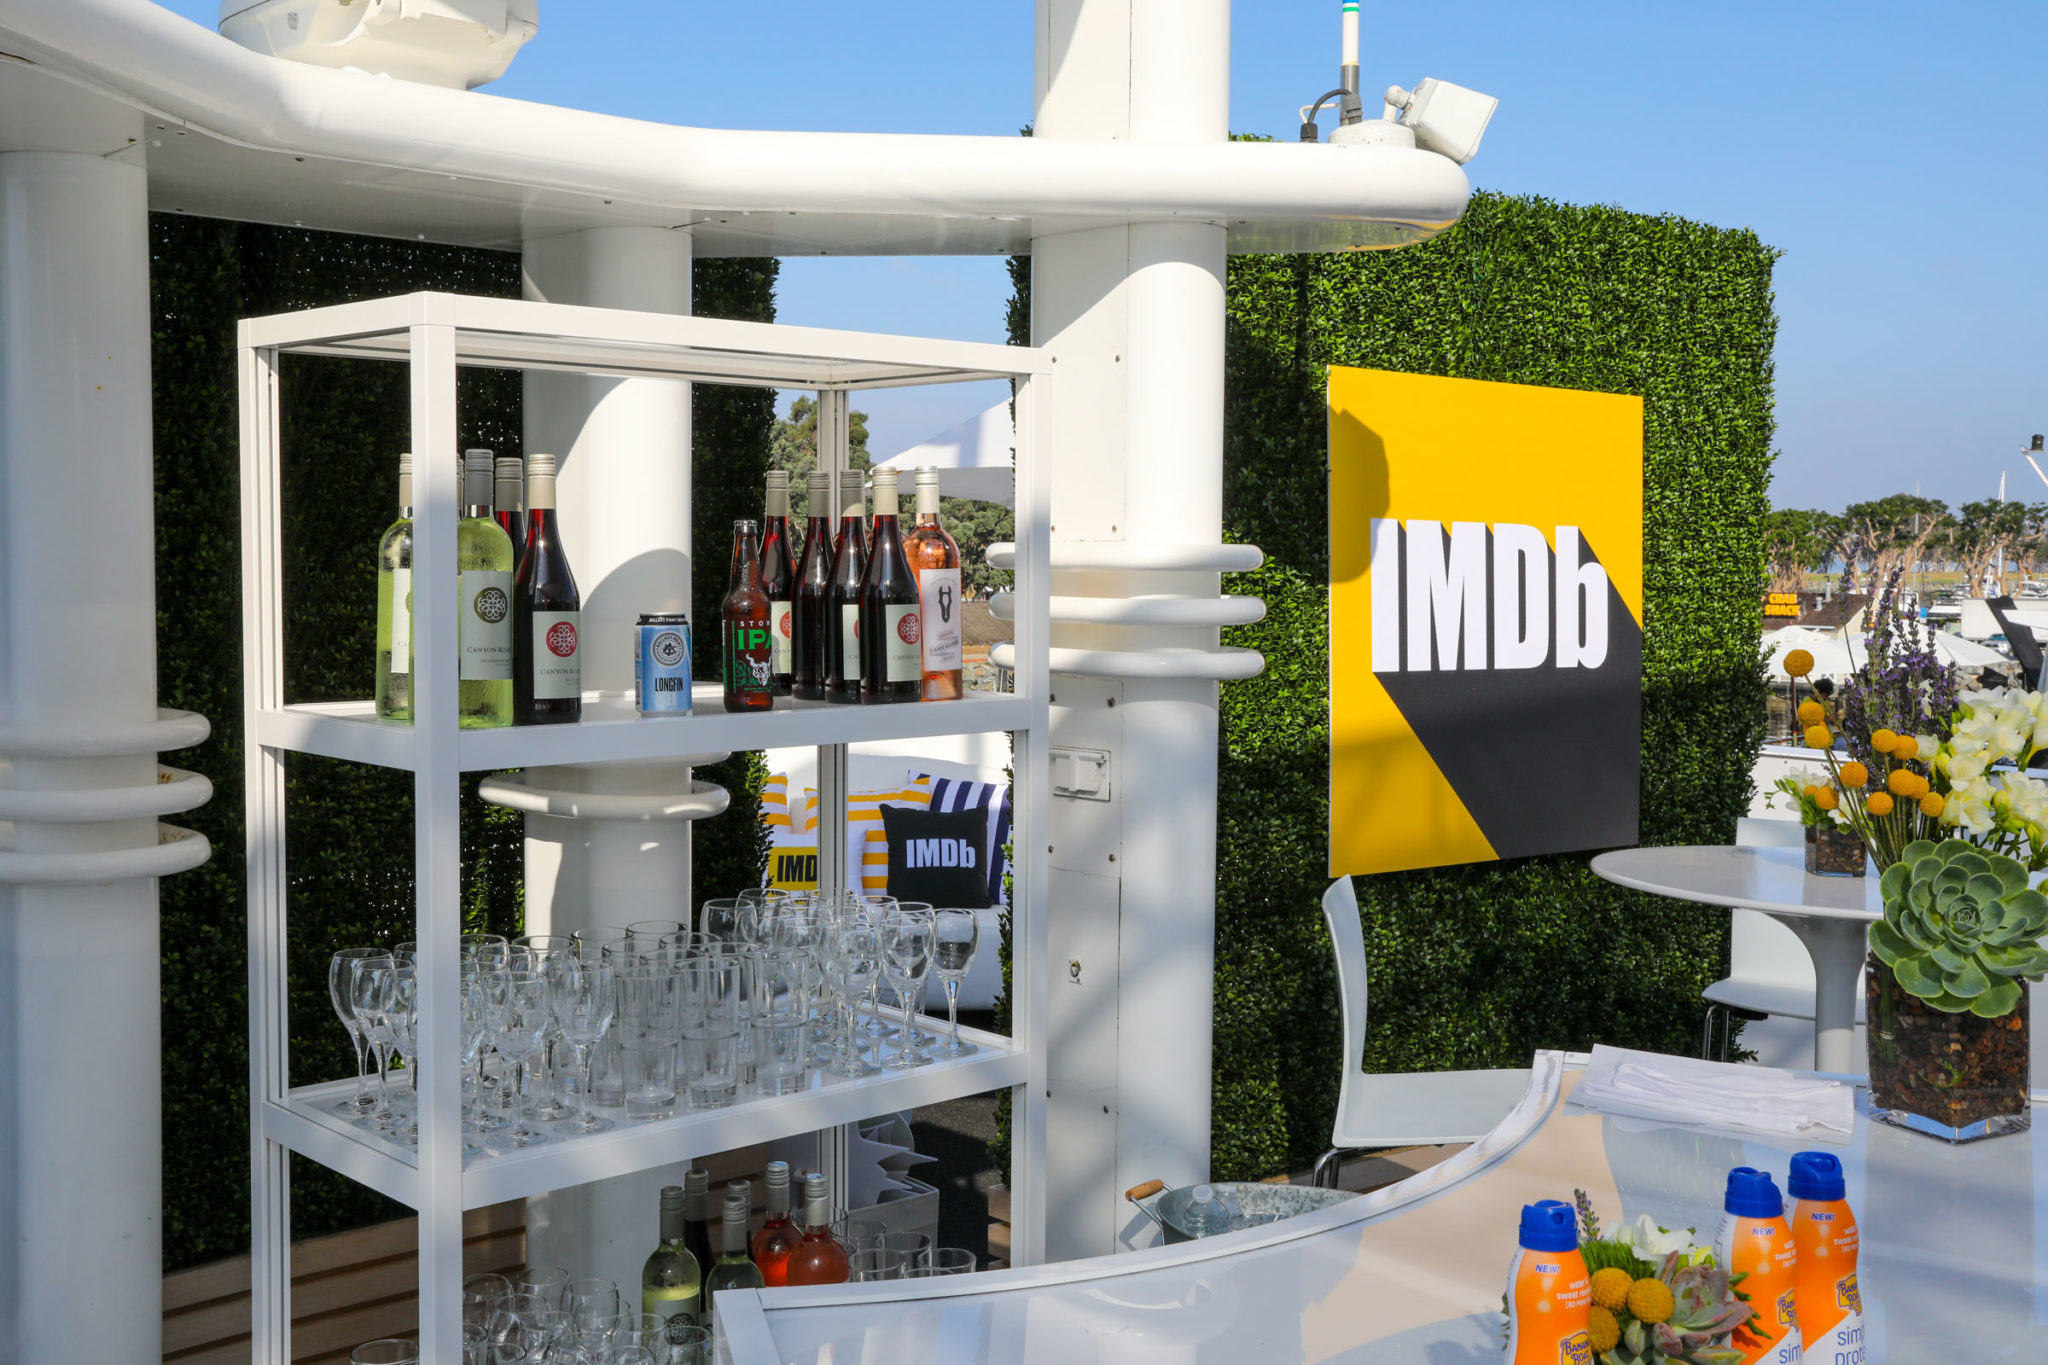 IMDB Boat Experiential Marketing Activation - NVE Experience Agency at Comic Con 2018